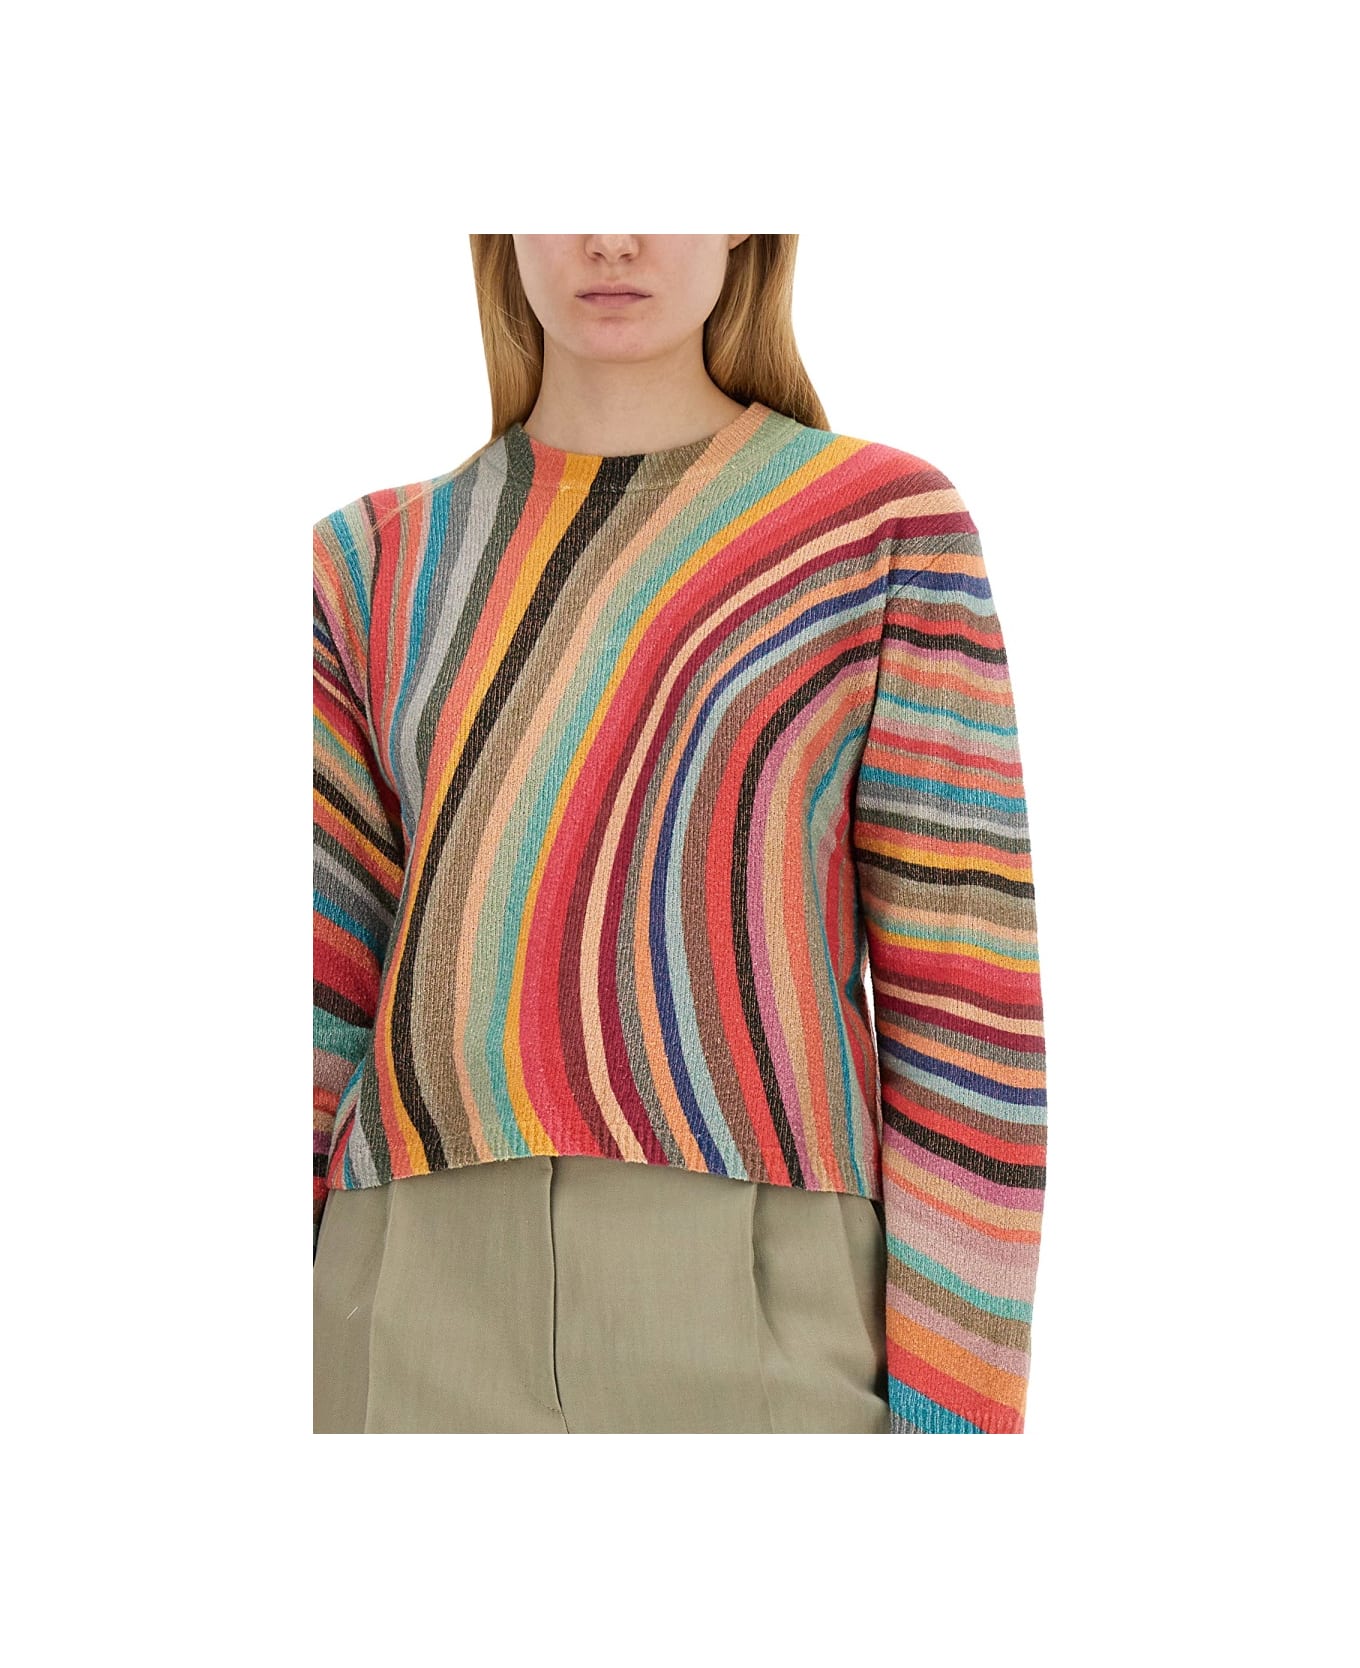 PS by Paul Smith "swirl" Shirt - MULTICOLOUR